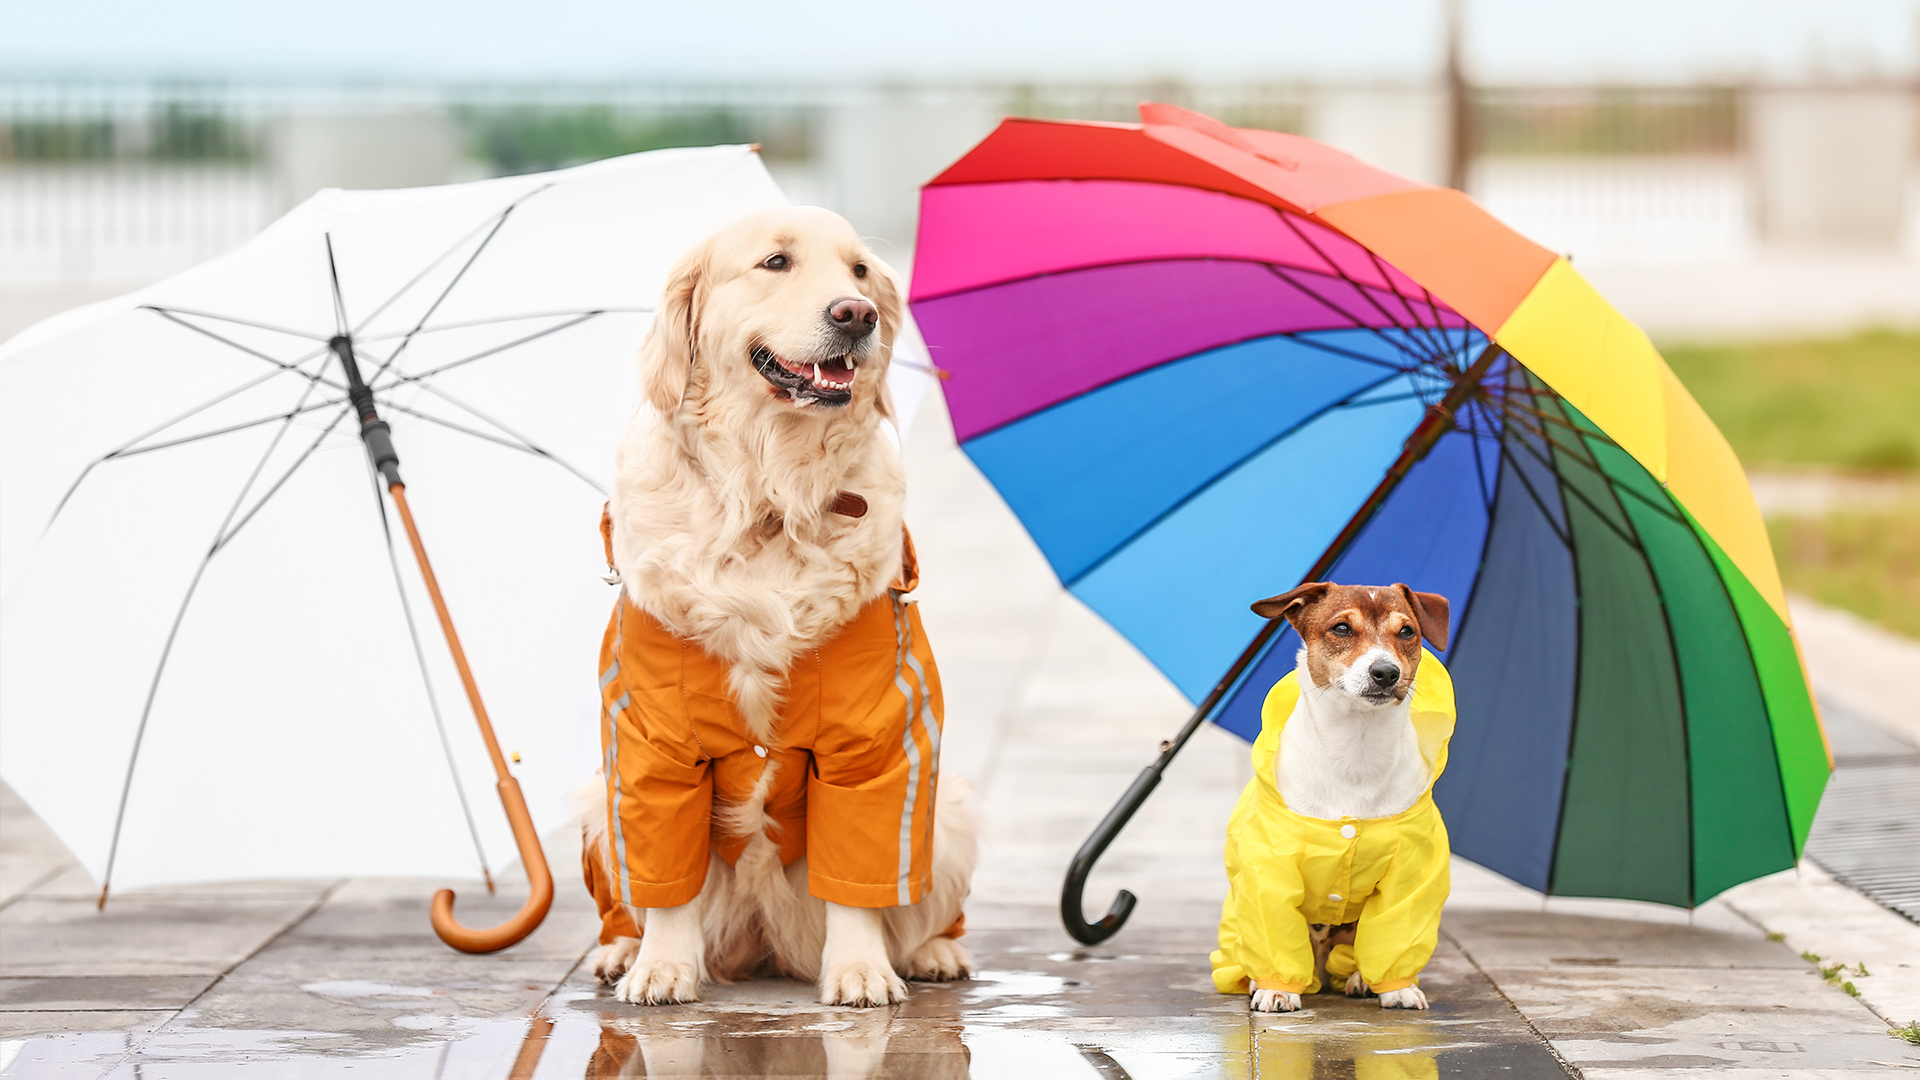 The Complete Monsoon Guide Pet Parents: Keeping Your Furry Friend Happy and Healthy